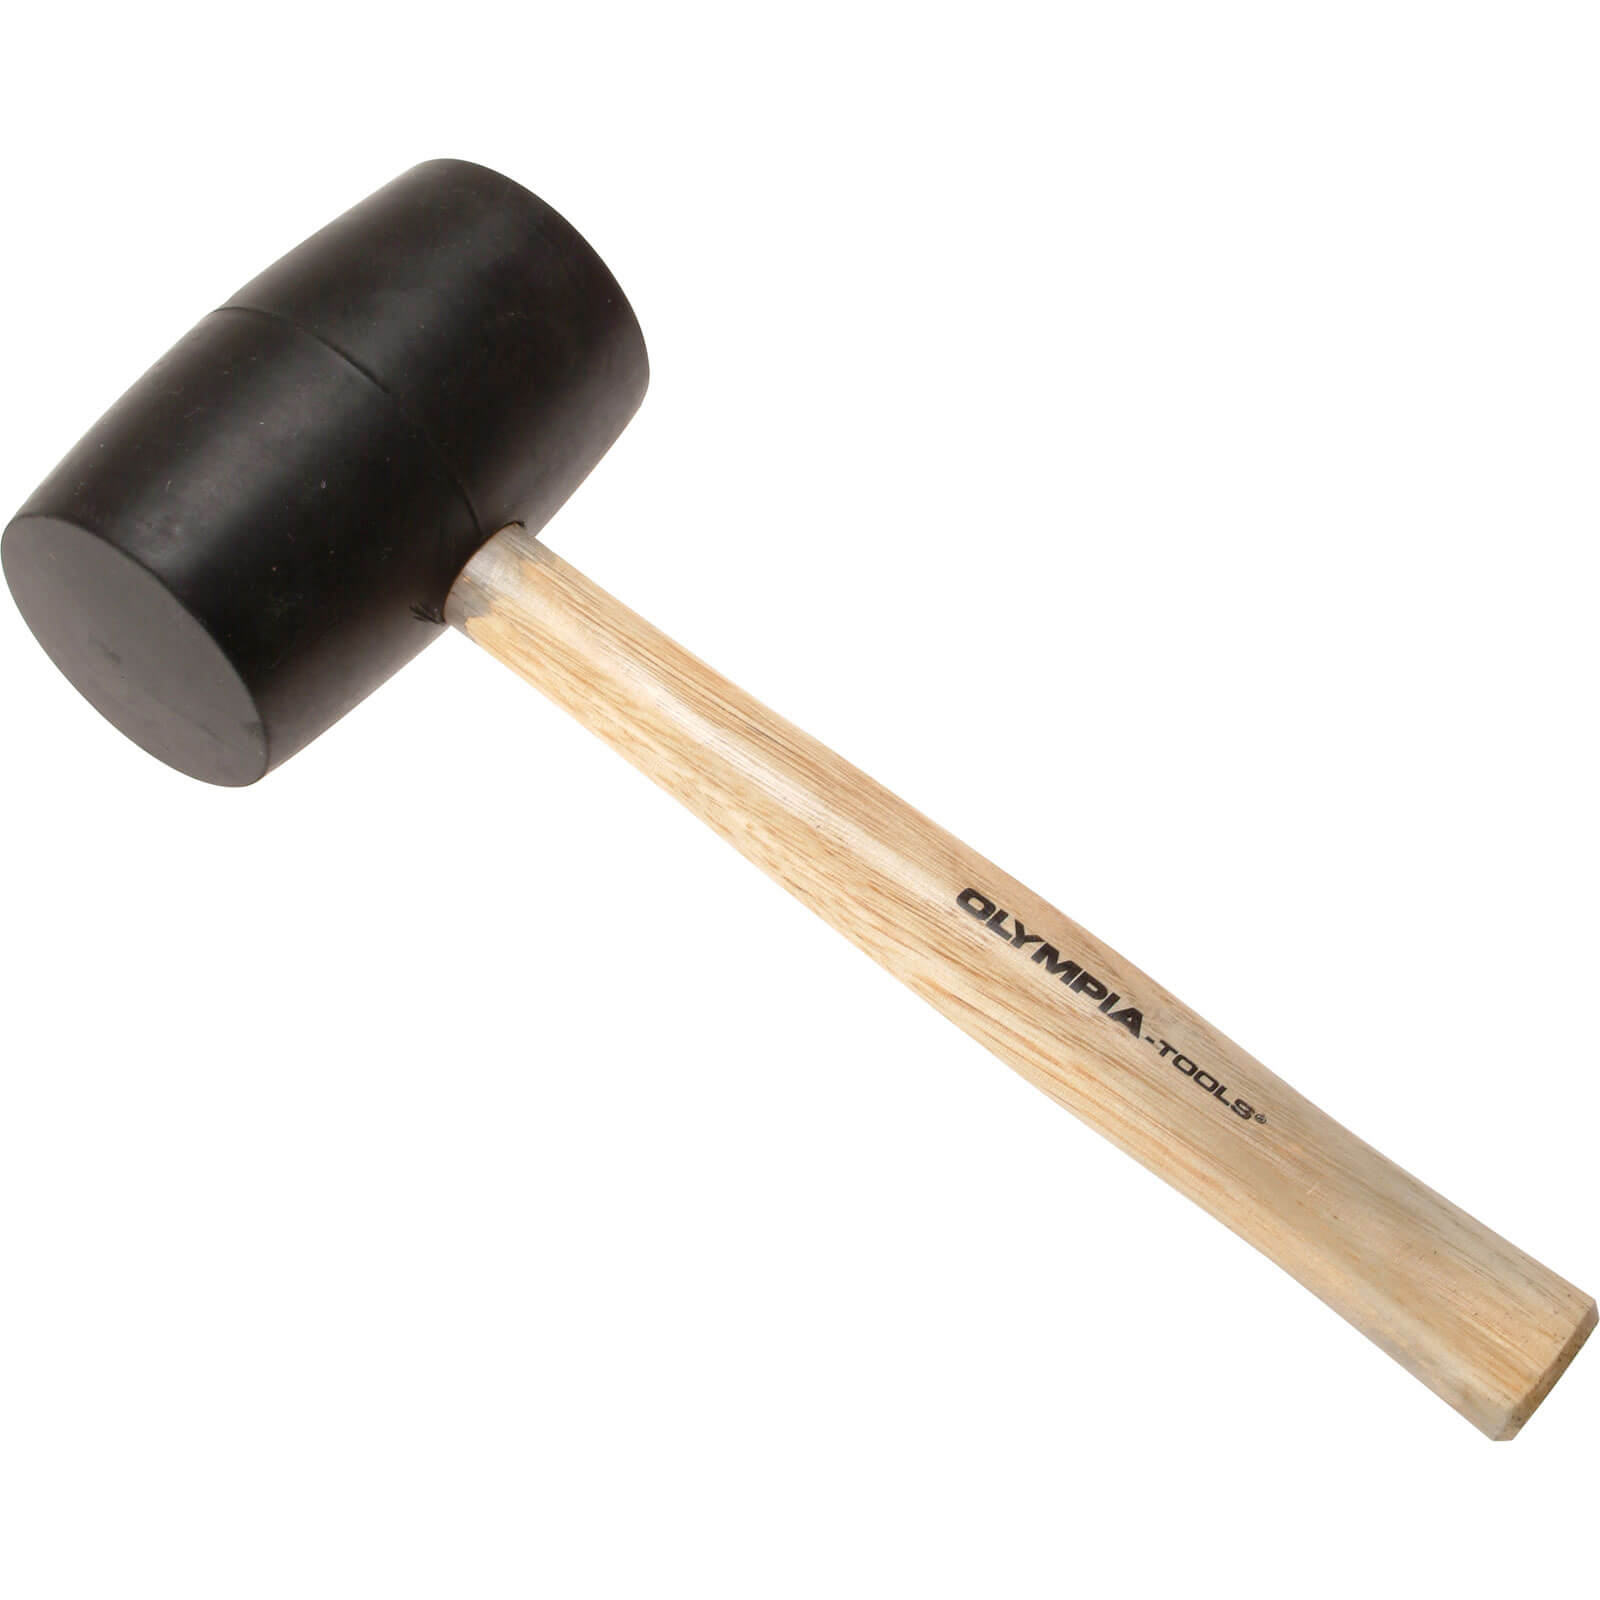 Olympia Rubber Mallet 907g / 32oz